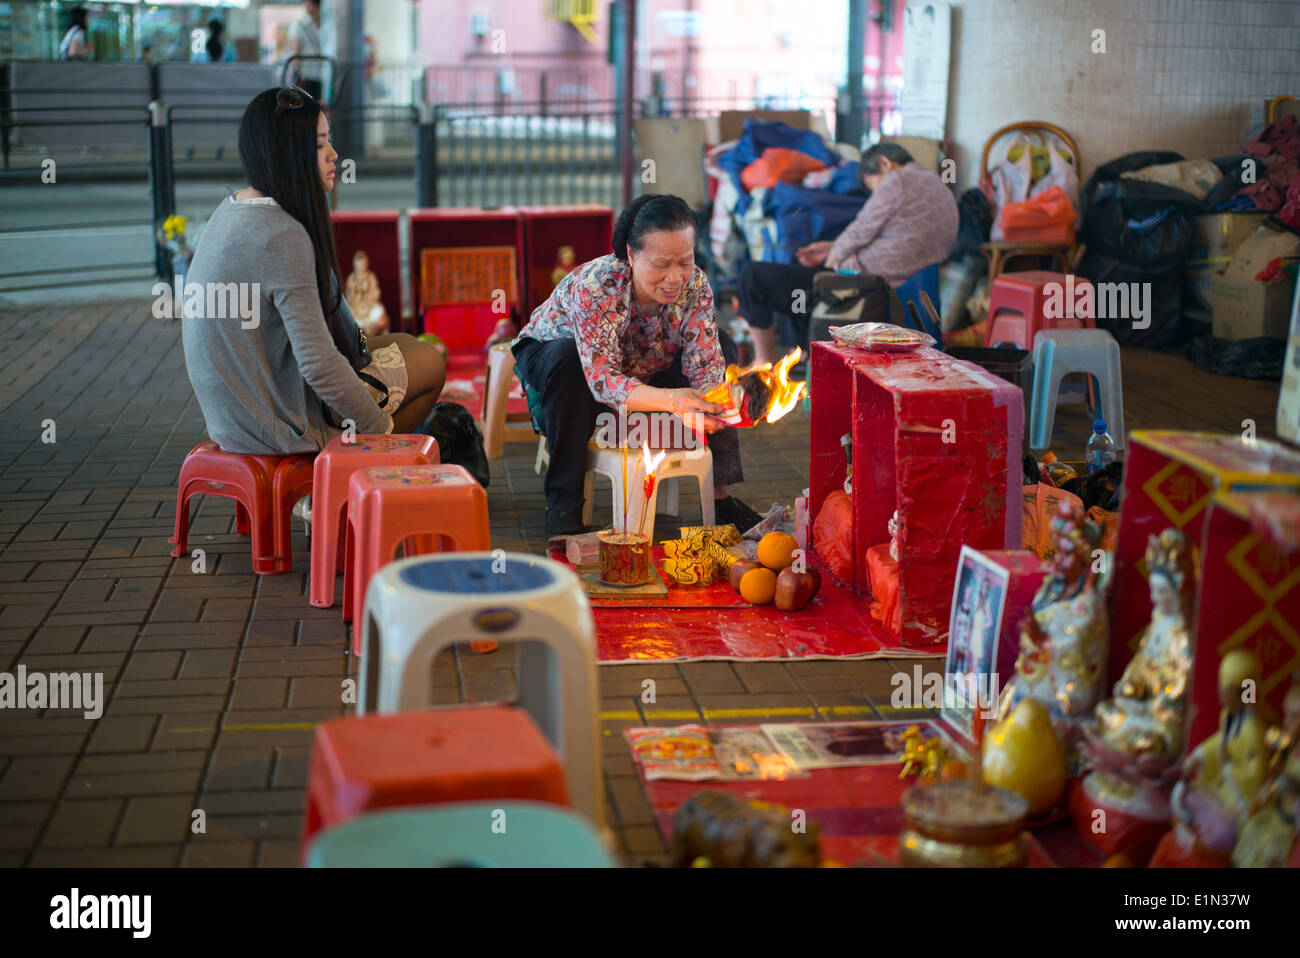 Tradional Chinese culture cleansing of bad spirits. Stock Photo